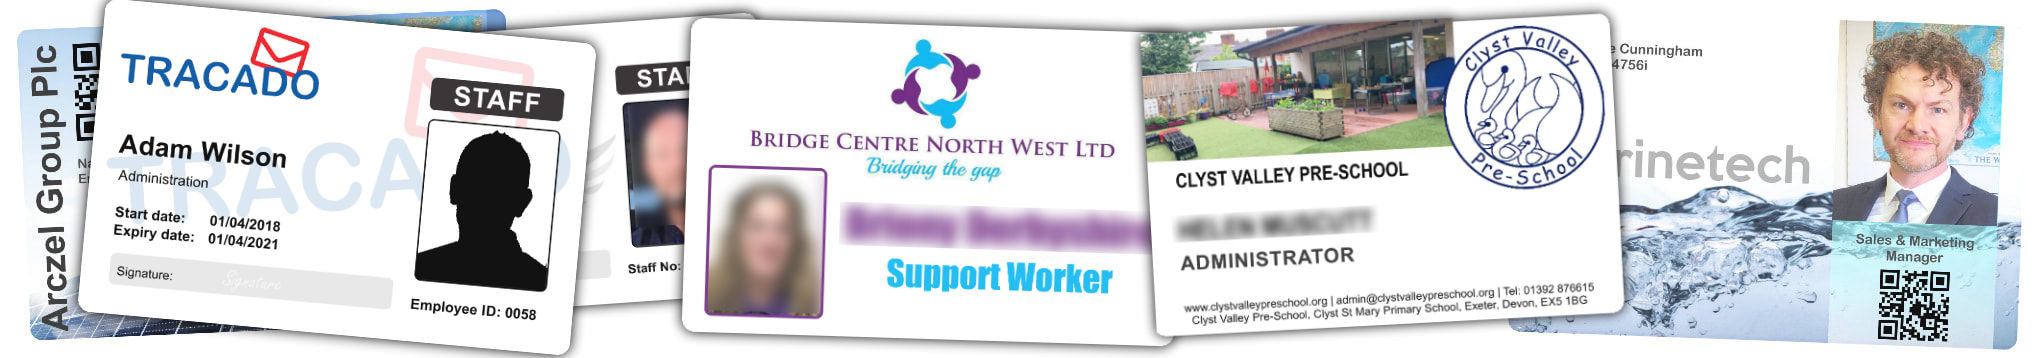 Colchester examples of staff photo ID cards | samples of employee Identity card printing | Workers ID cards printed in 